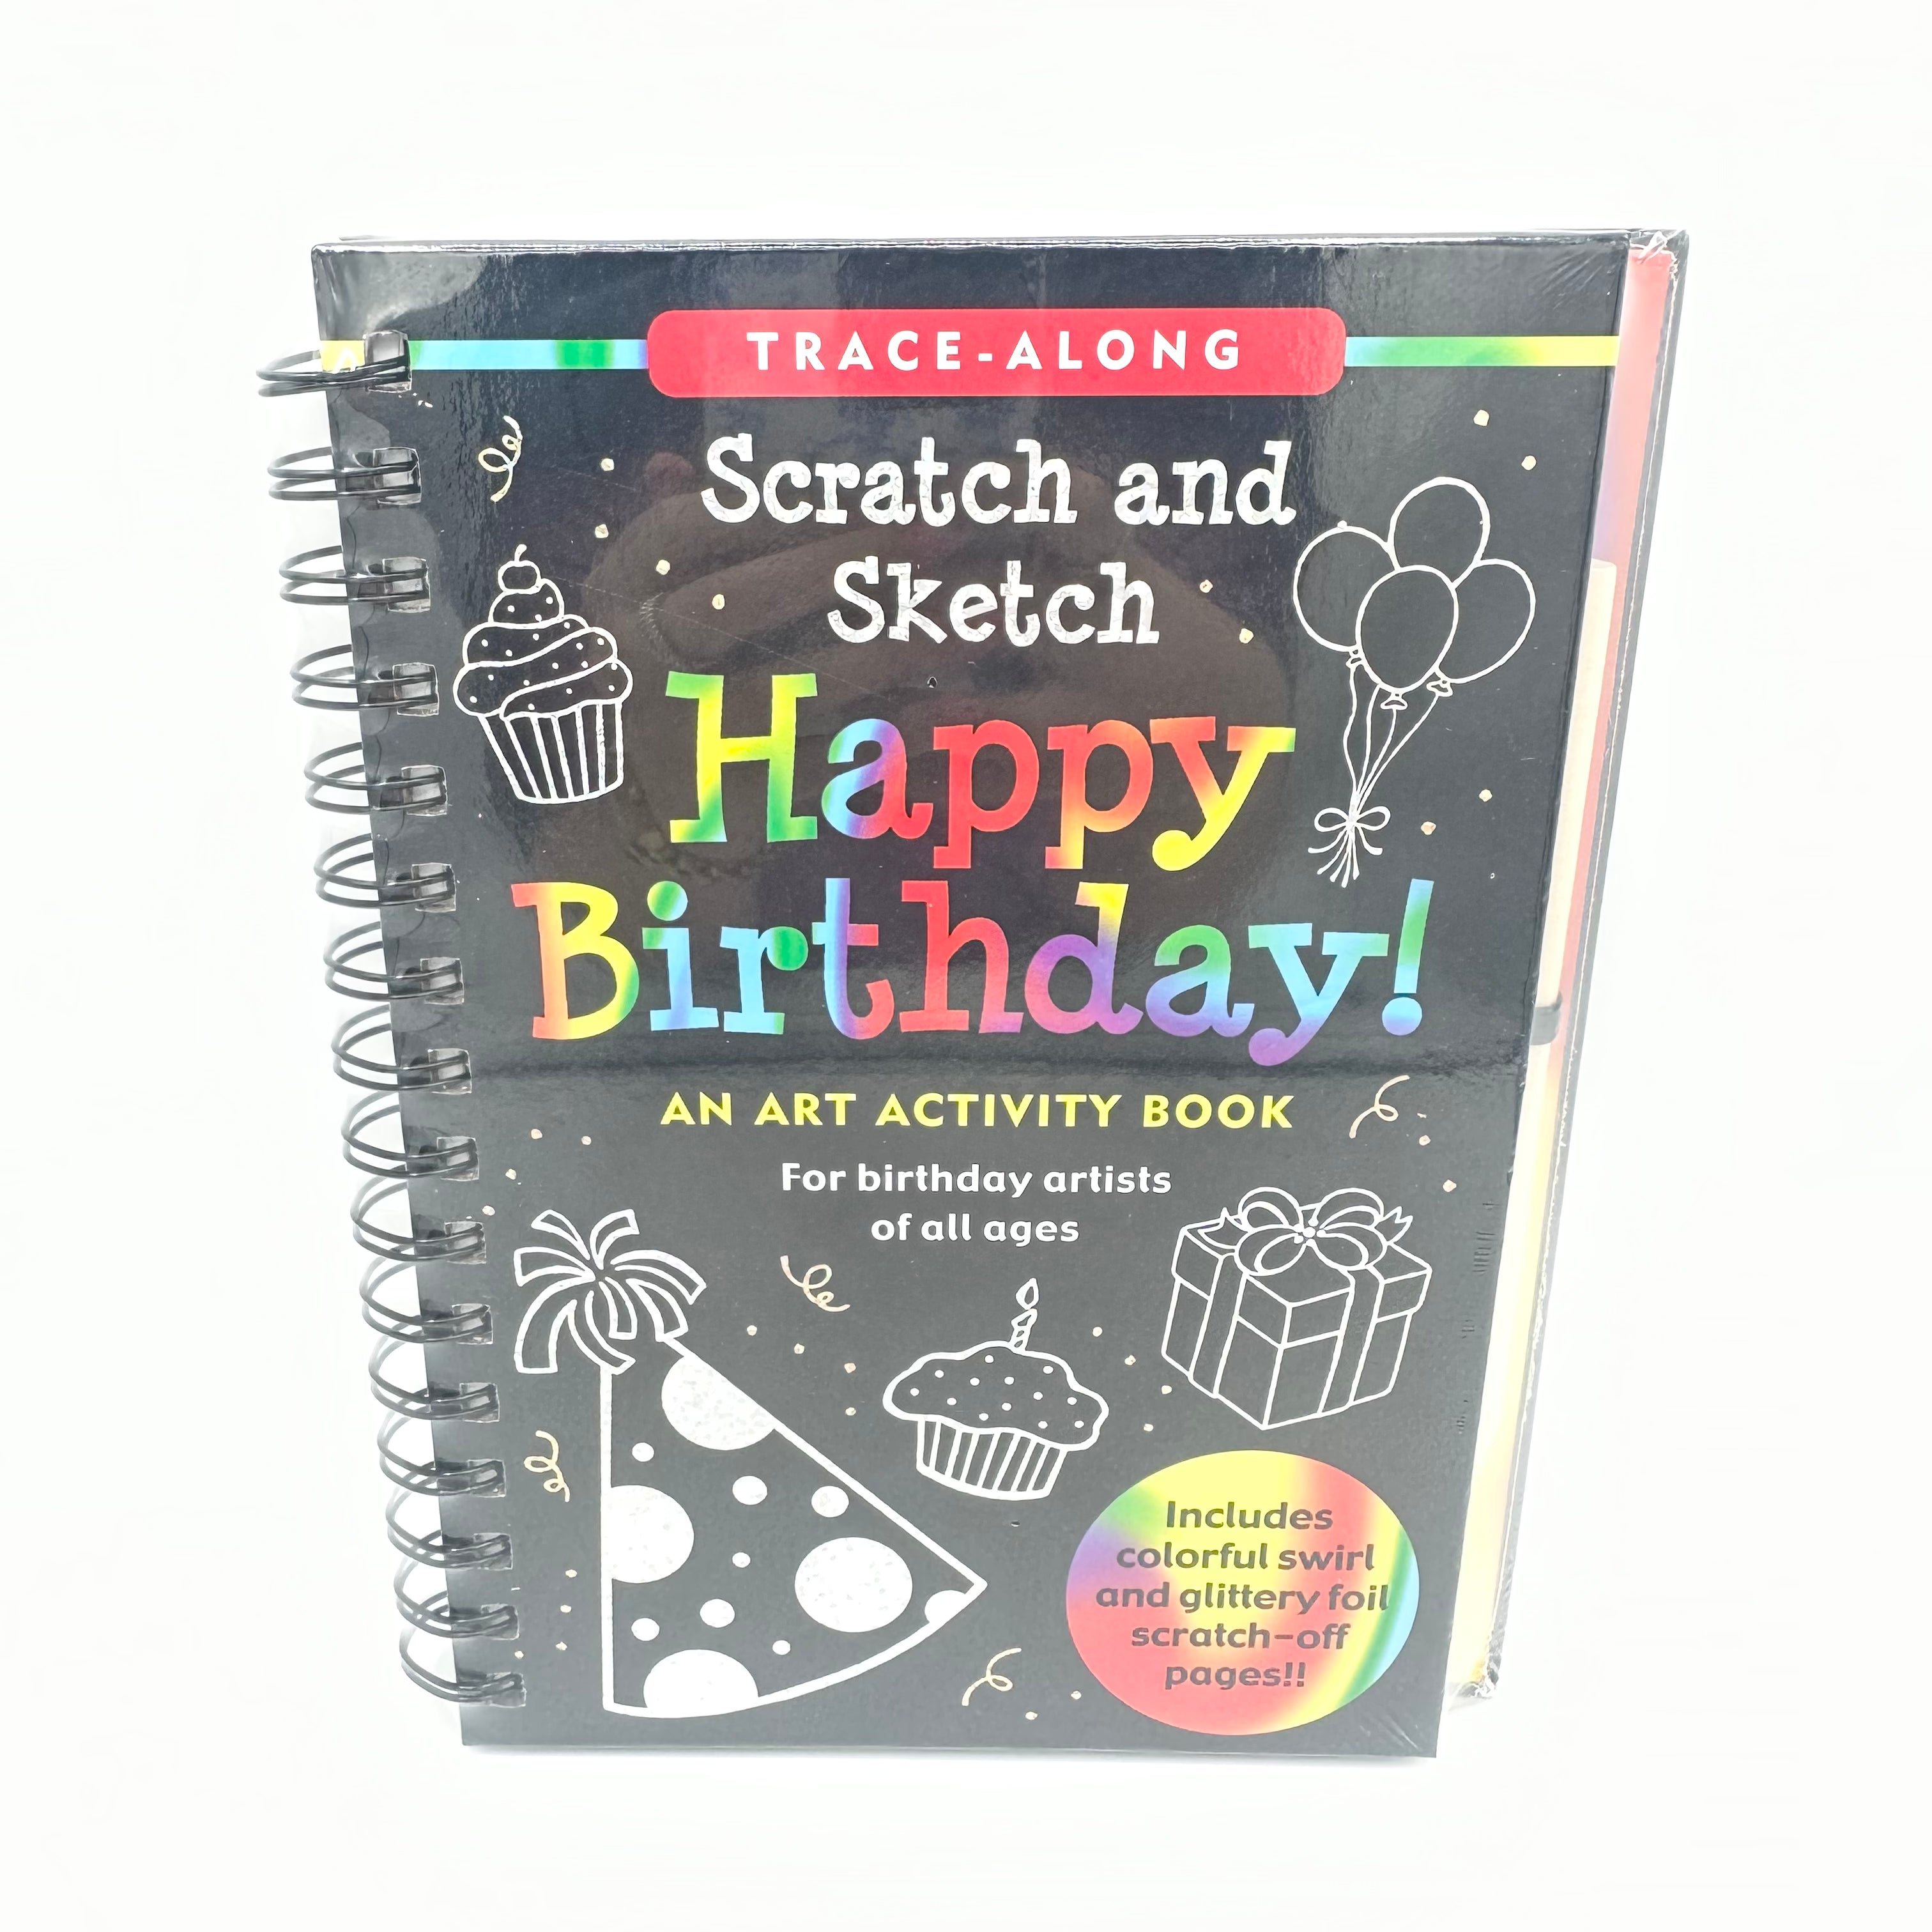 Scratch and Sketch Activity Books